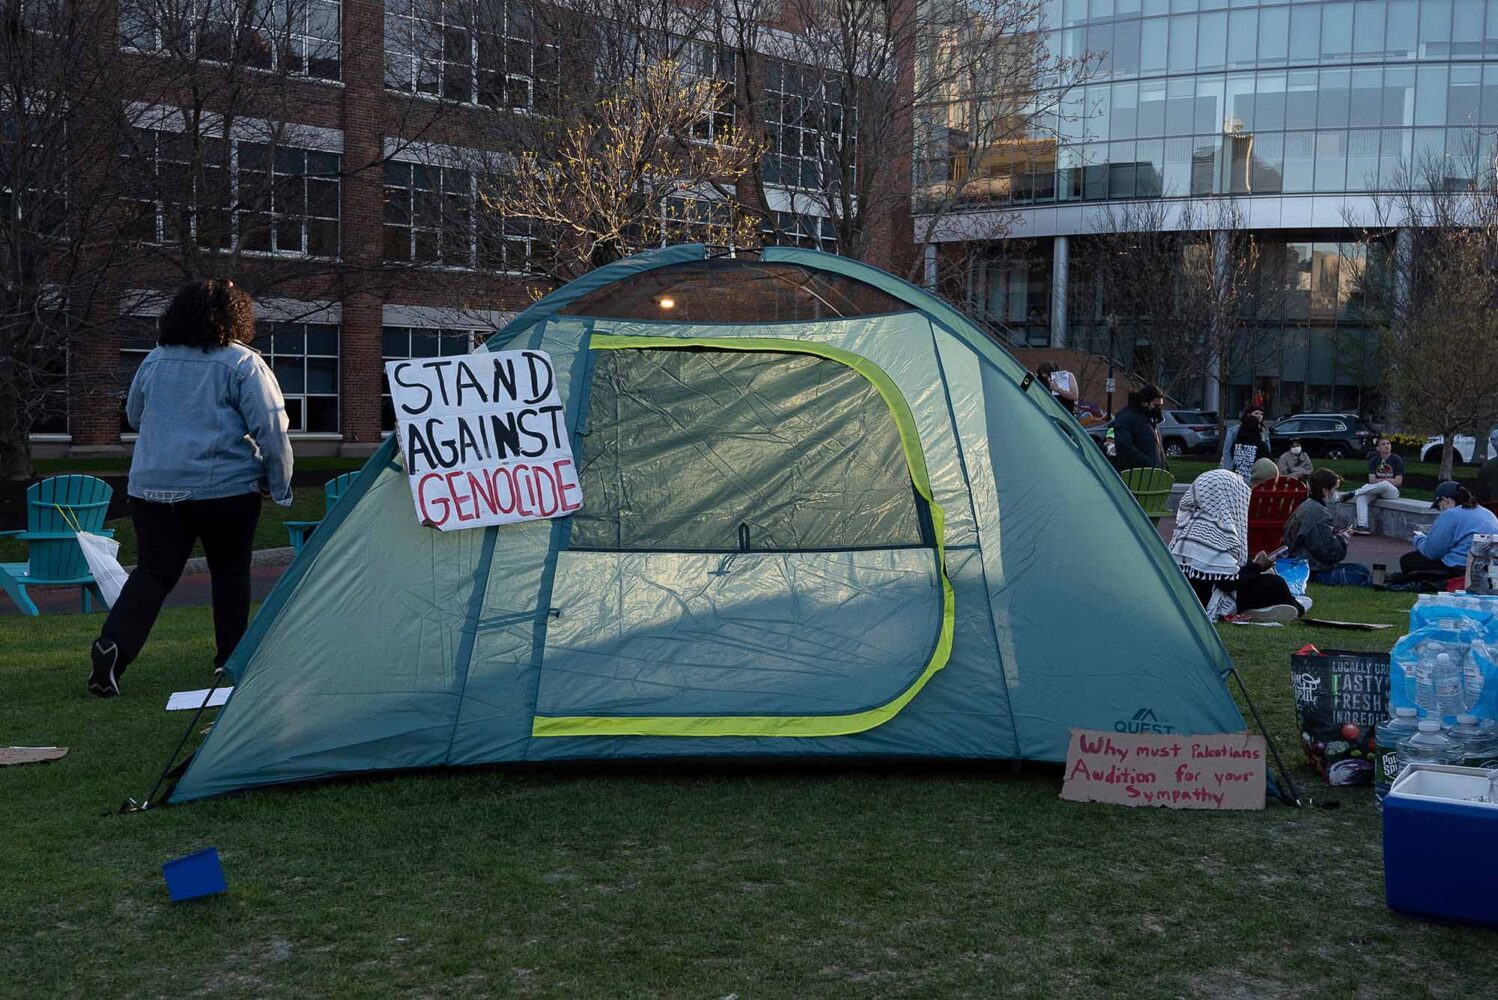 Photo: A picture of a tent with a sign on it that says "Stand Against Genocide."